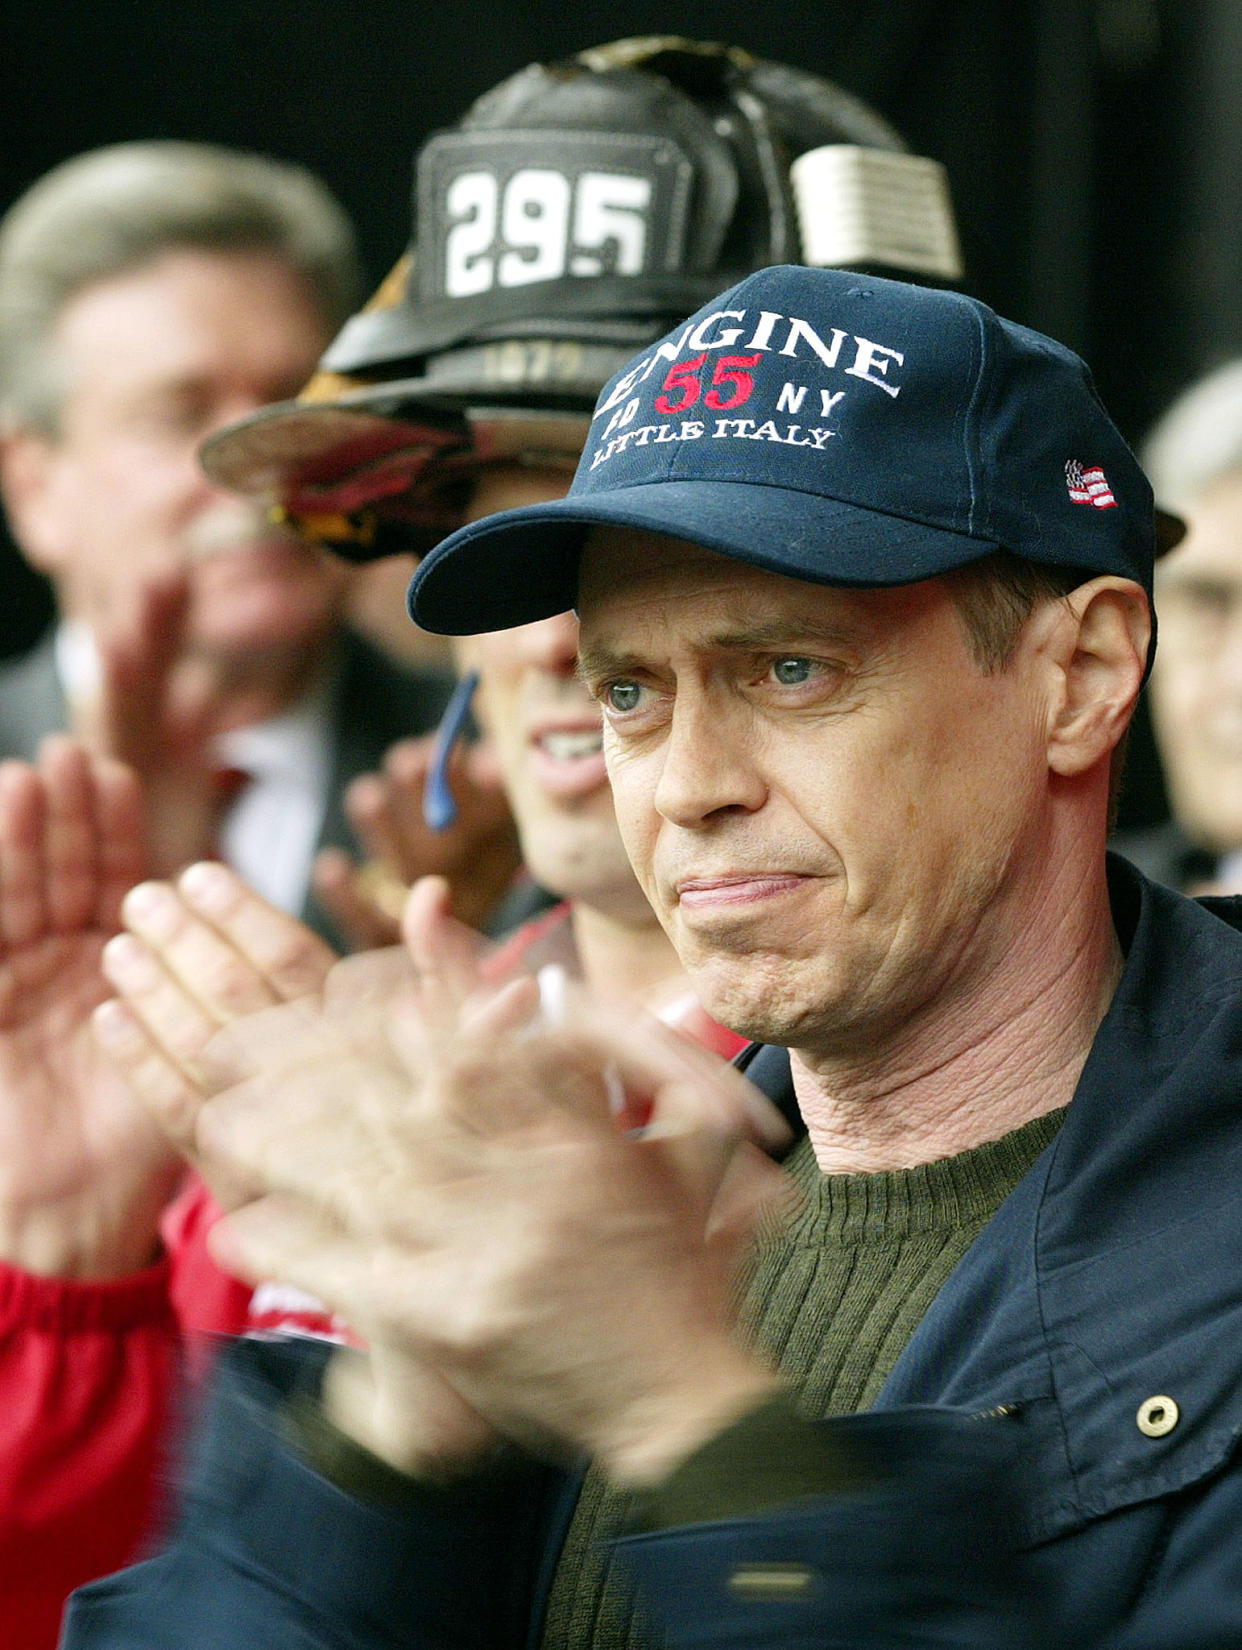 Actor Steve Buscemi applauds at a protest staged by firefighters in New
York, October 11, 2002. The New York Firefighter Rally, organized by
the Uniformed Firefighters Association, was held to protest current
wages. The union rejected a proposal on October 10 to increase pay by
11.5 percent over 30 months. The president of the 9,000-member union
said the members have been working without a contract for 29 months and
deserve a larger raise. Buscemi is a former fireman. REUTERS/Shannon
Stapleton

PM